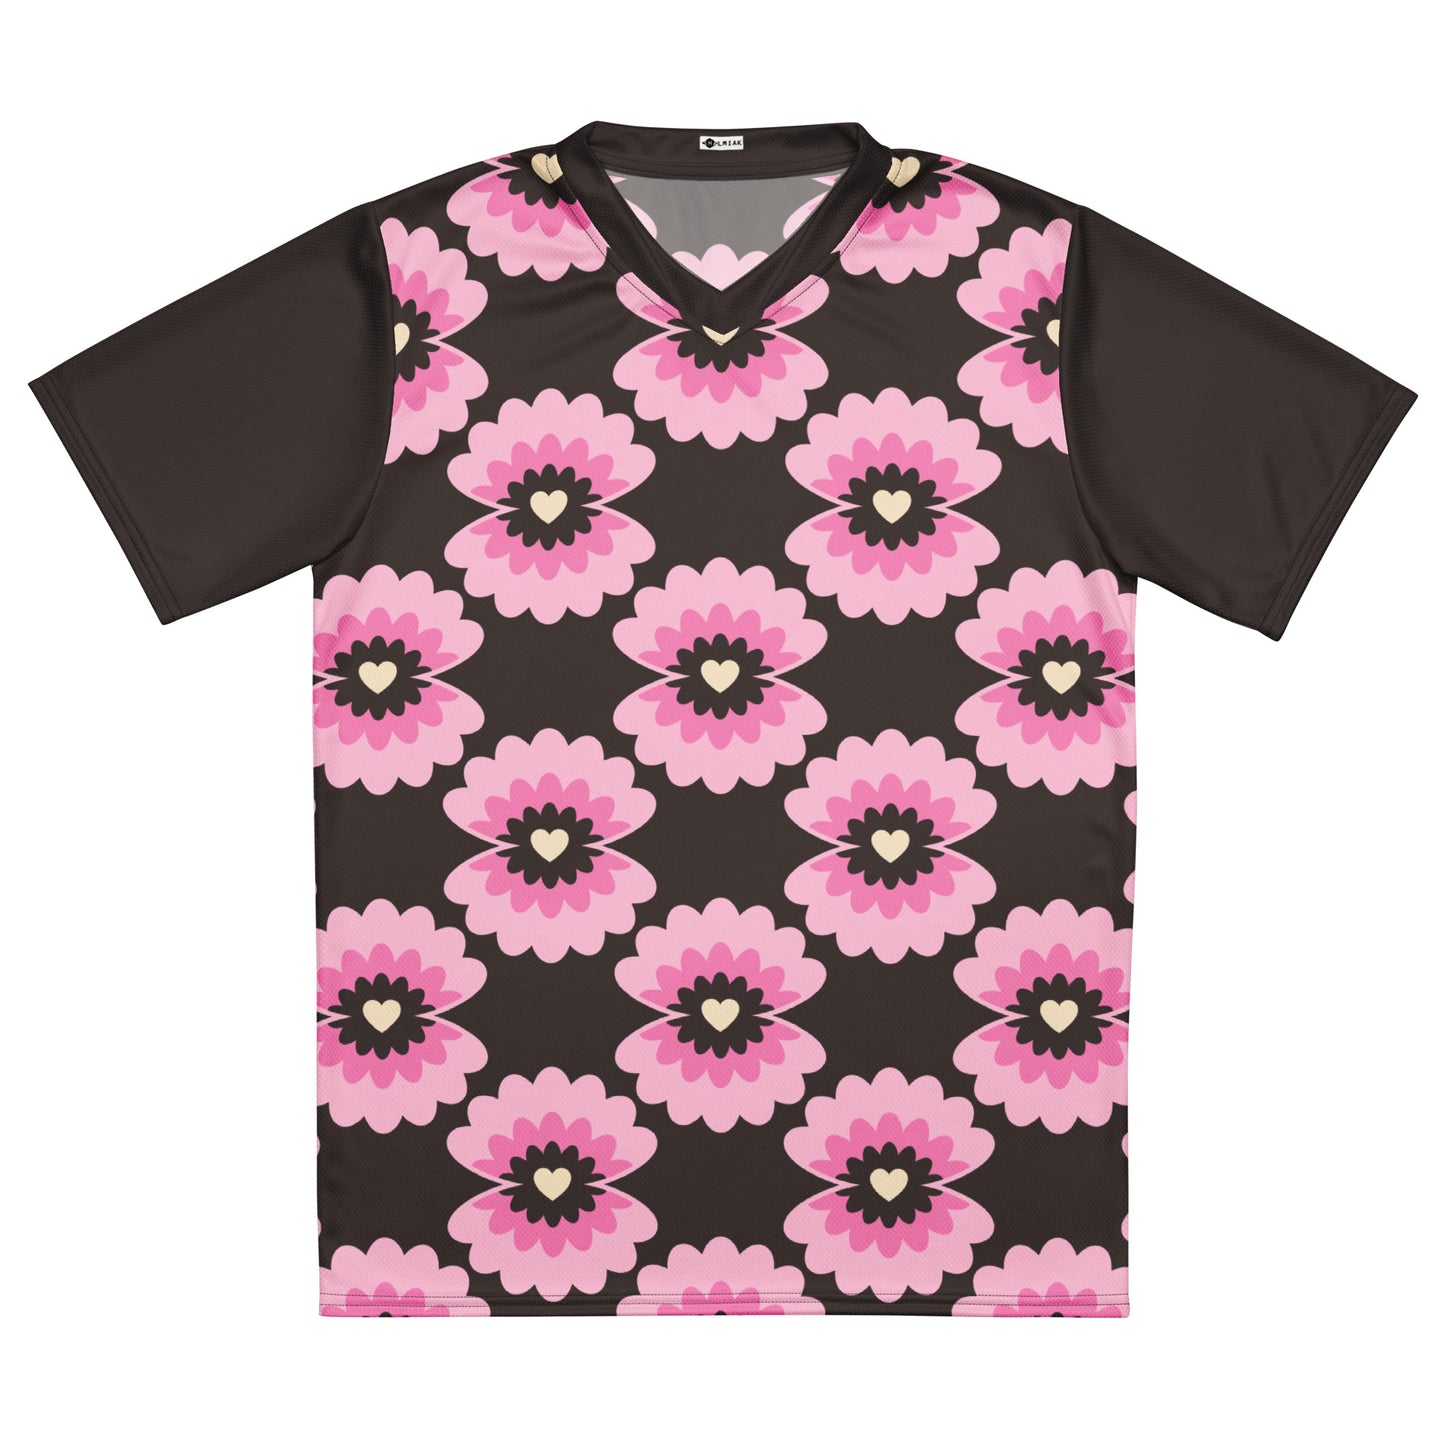 LOVE PEARL pink brown - Recycled unisex sports jersey